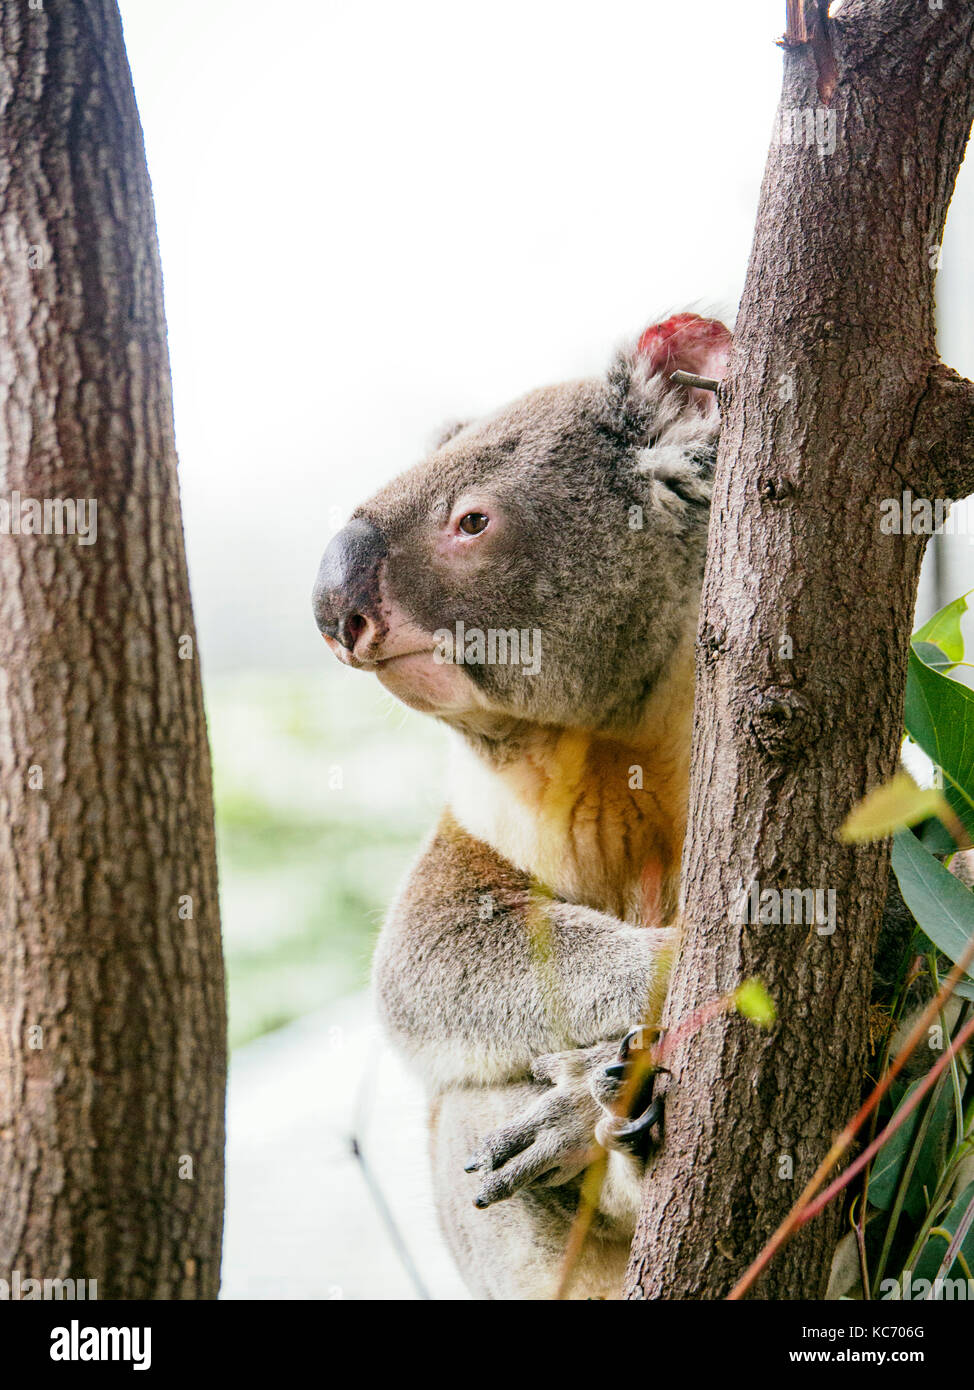 (Koala marsupial) on tree Banque D'Images